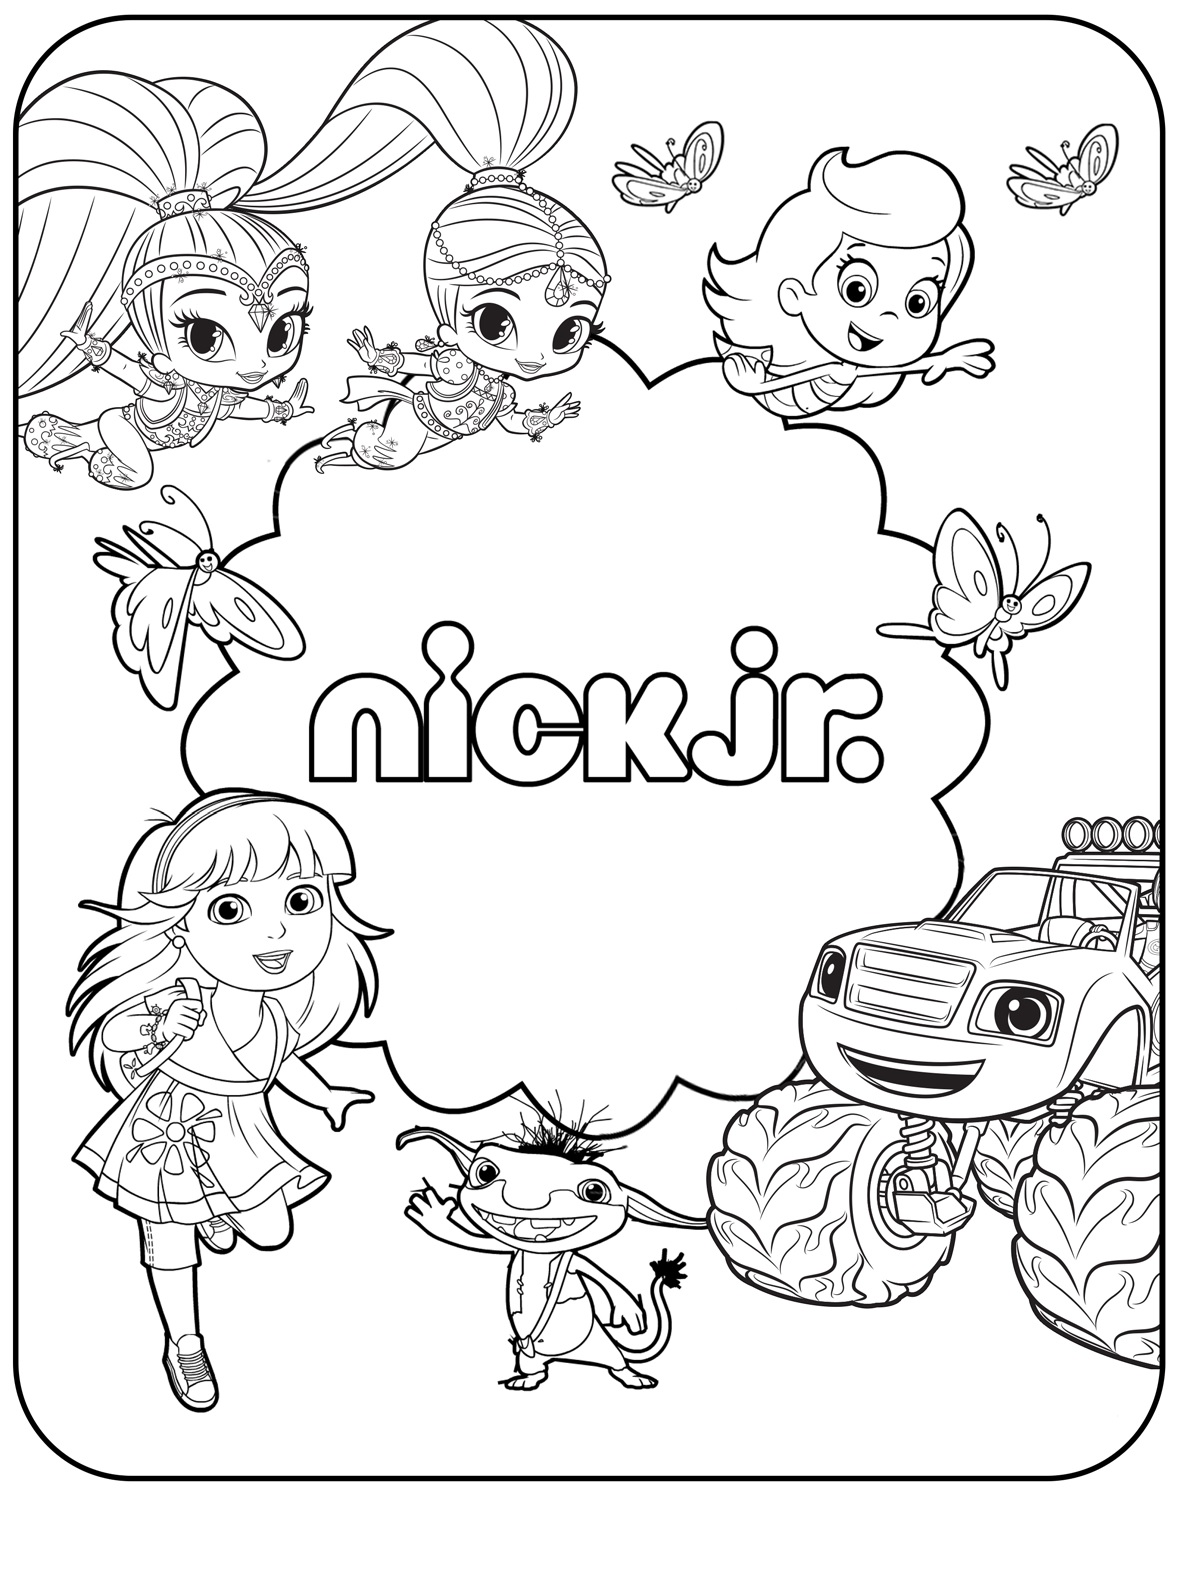 Nickelodeon Usa Debuts First Episode Of Shimmer And Shine On Itunes Sketch Coloring Page